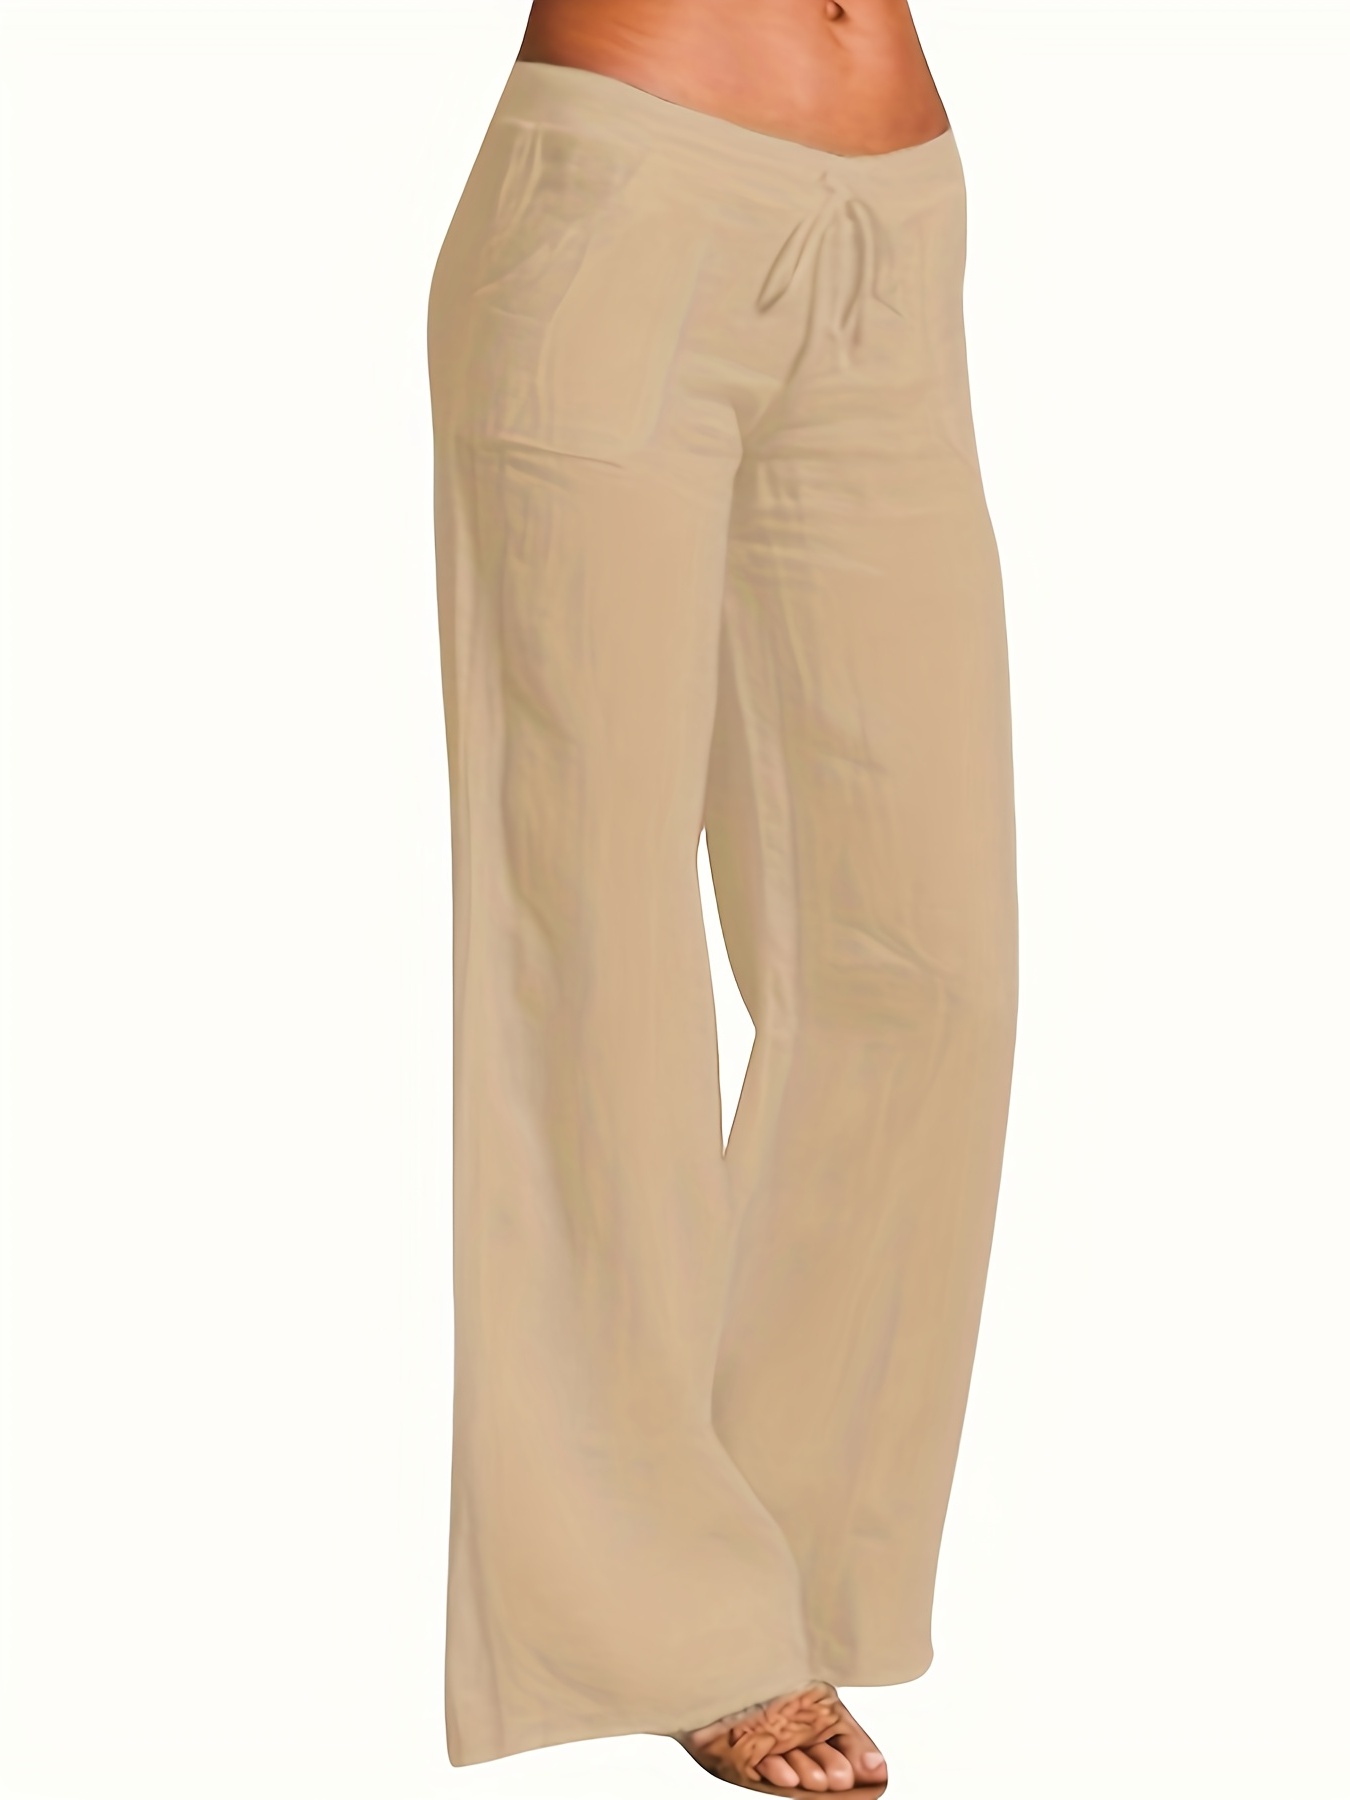 Buy Solid Palazzo Pants with Tie-Up Detail and Pockets